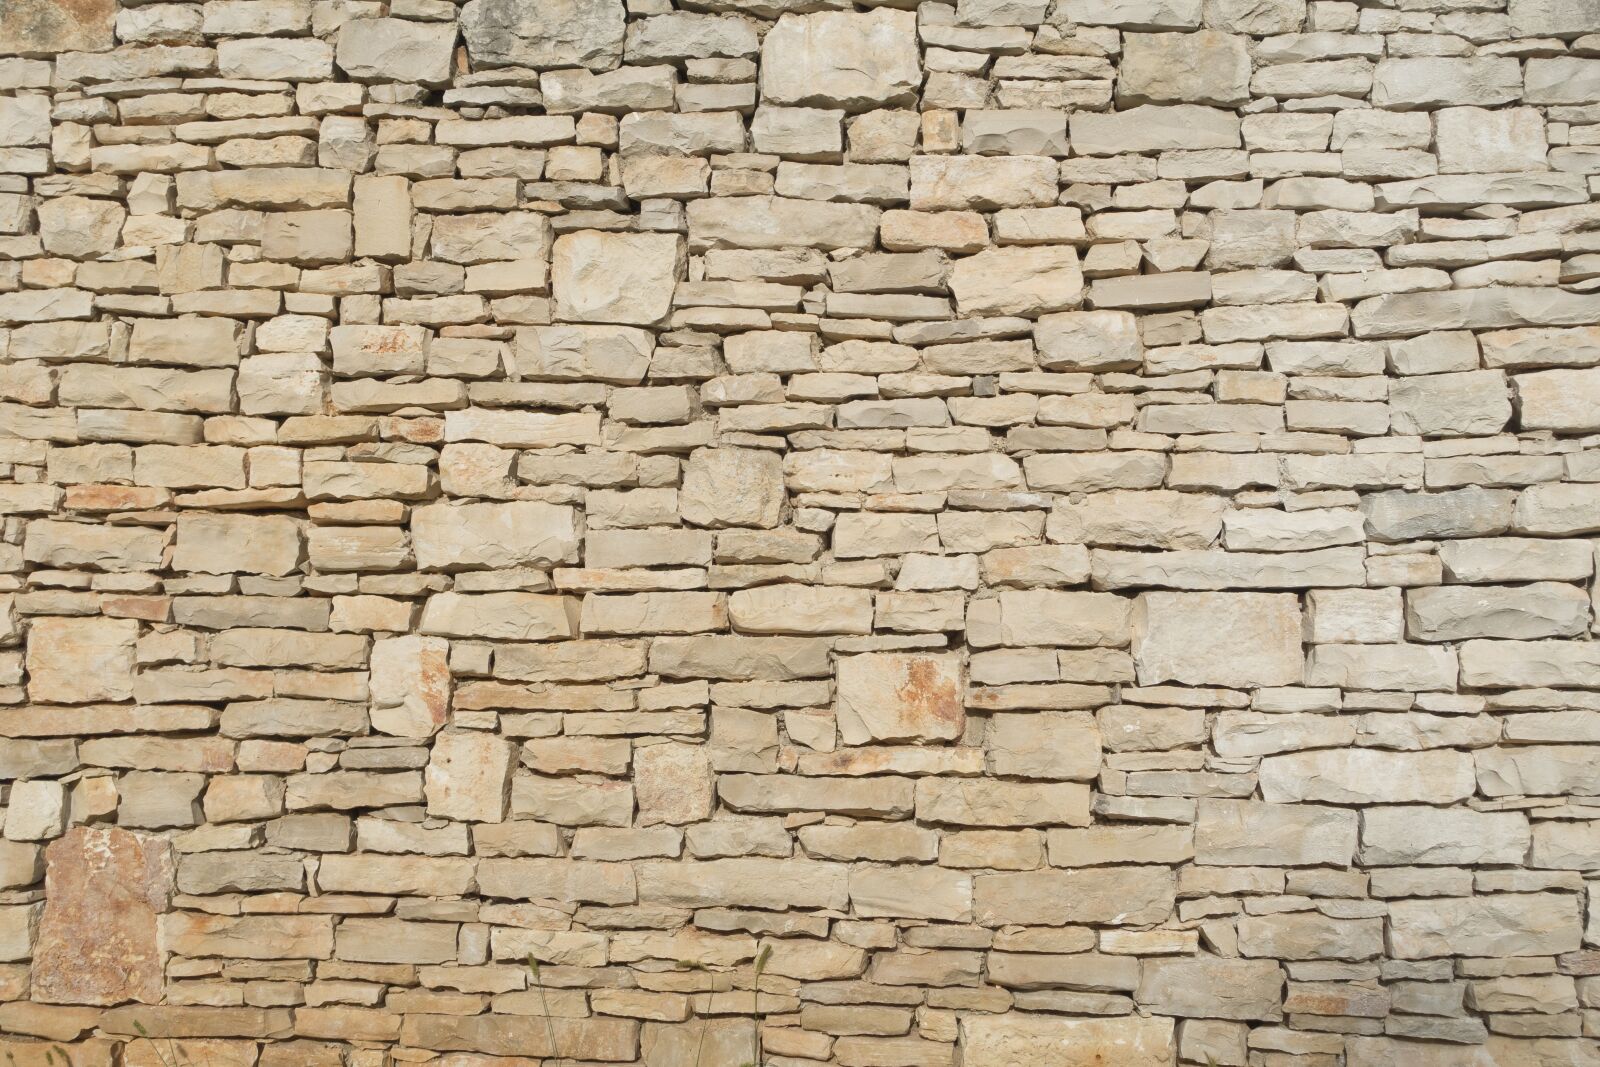 Sony Cyber-shot DSC-RX100 III sample photo. Wall, stone wall, background photography